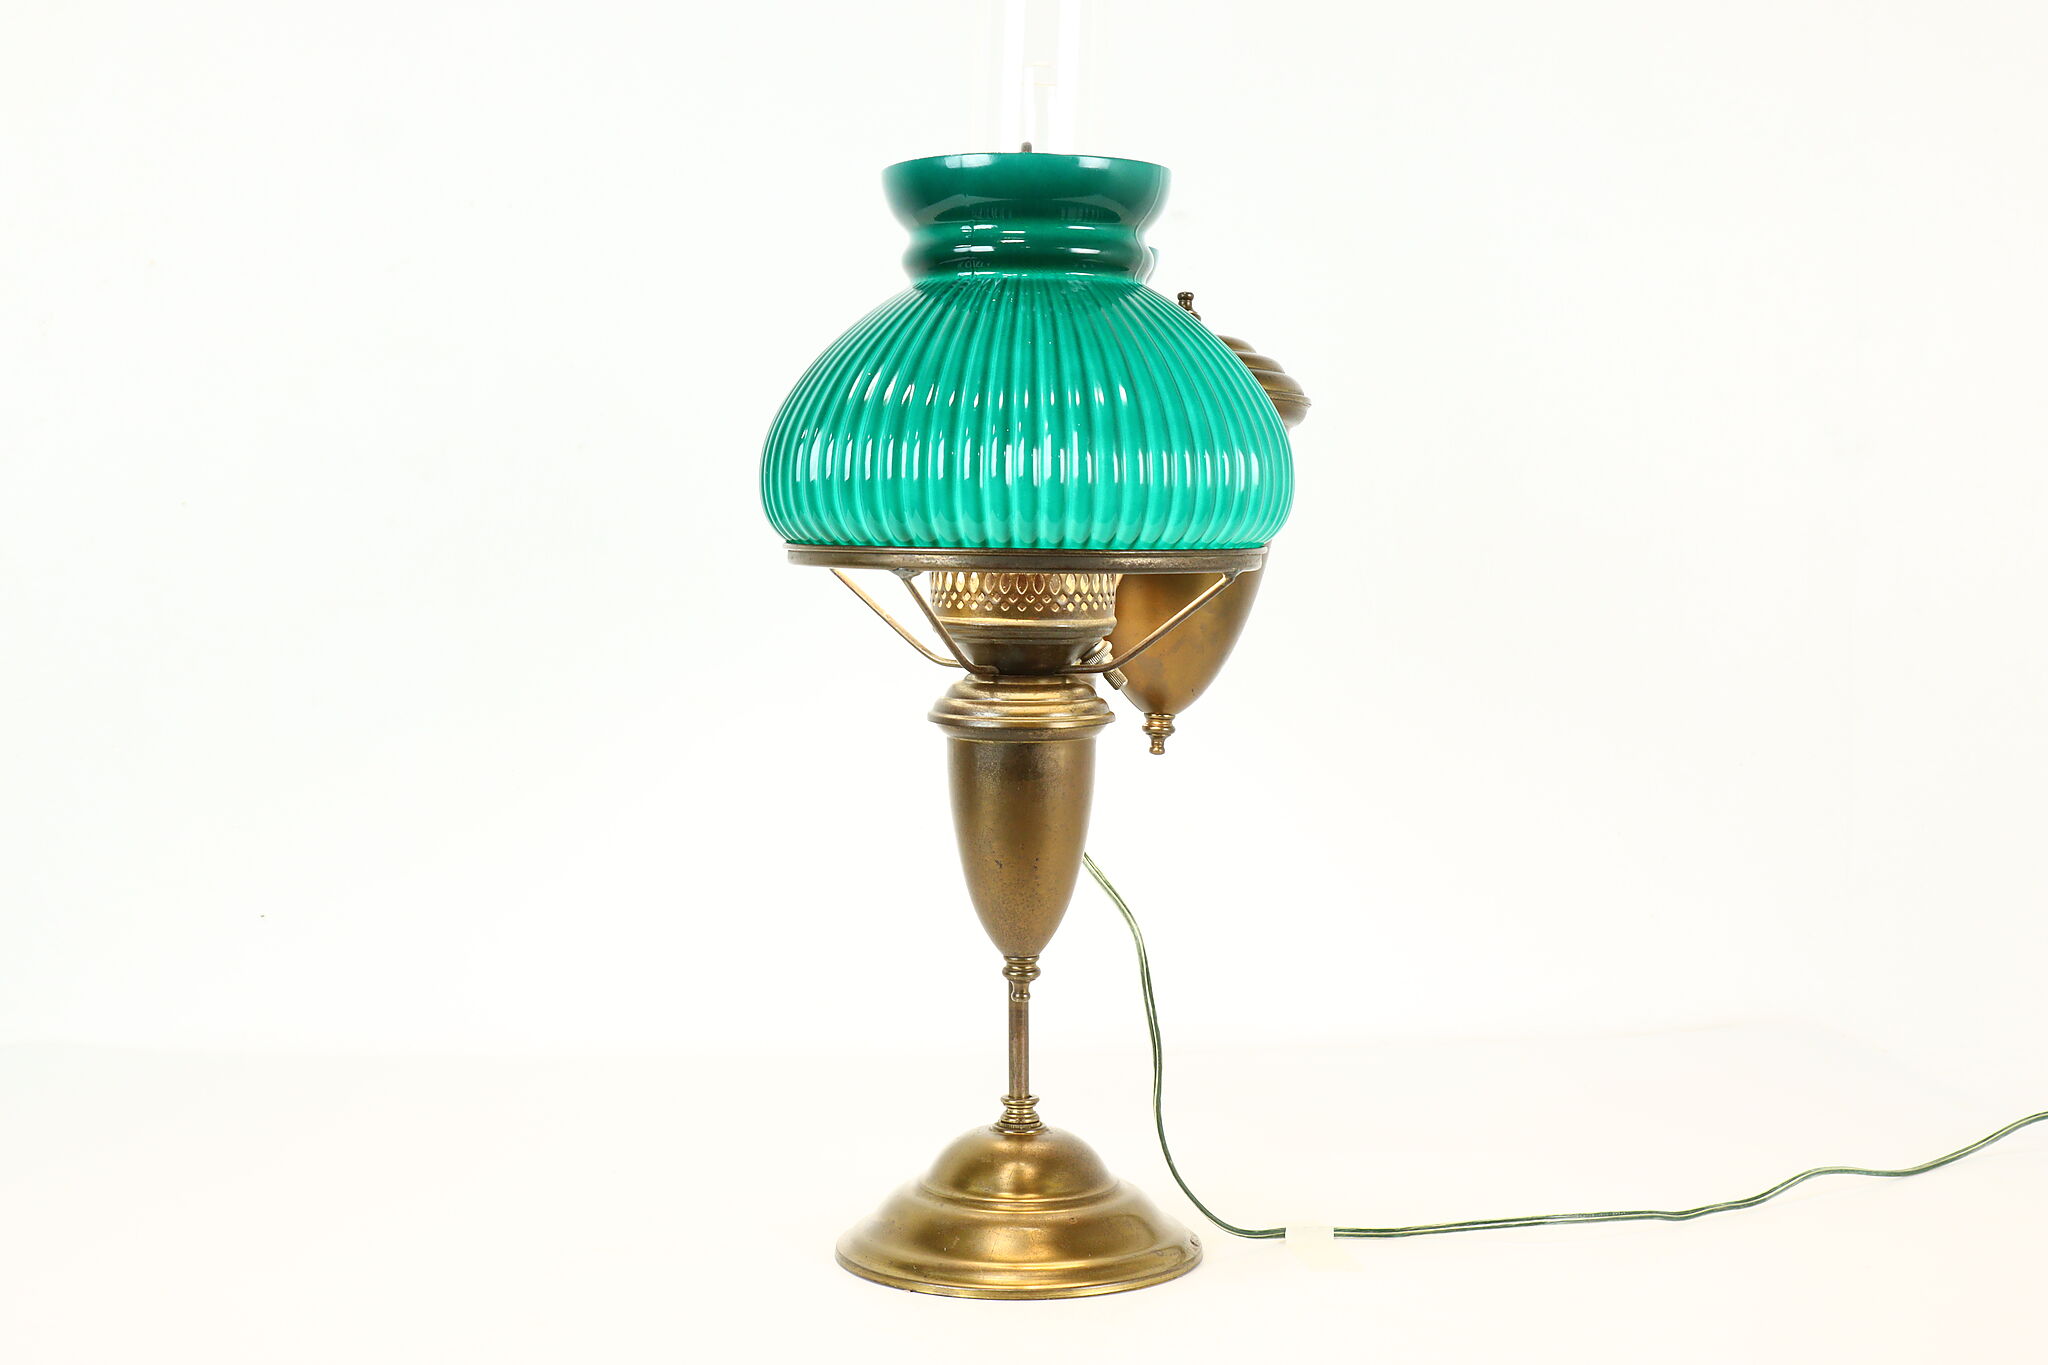 Antique Lamp, Brass Student Lamp W/ Two Emerald Shades, Lighting